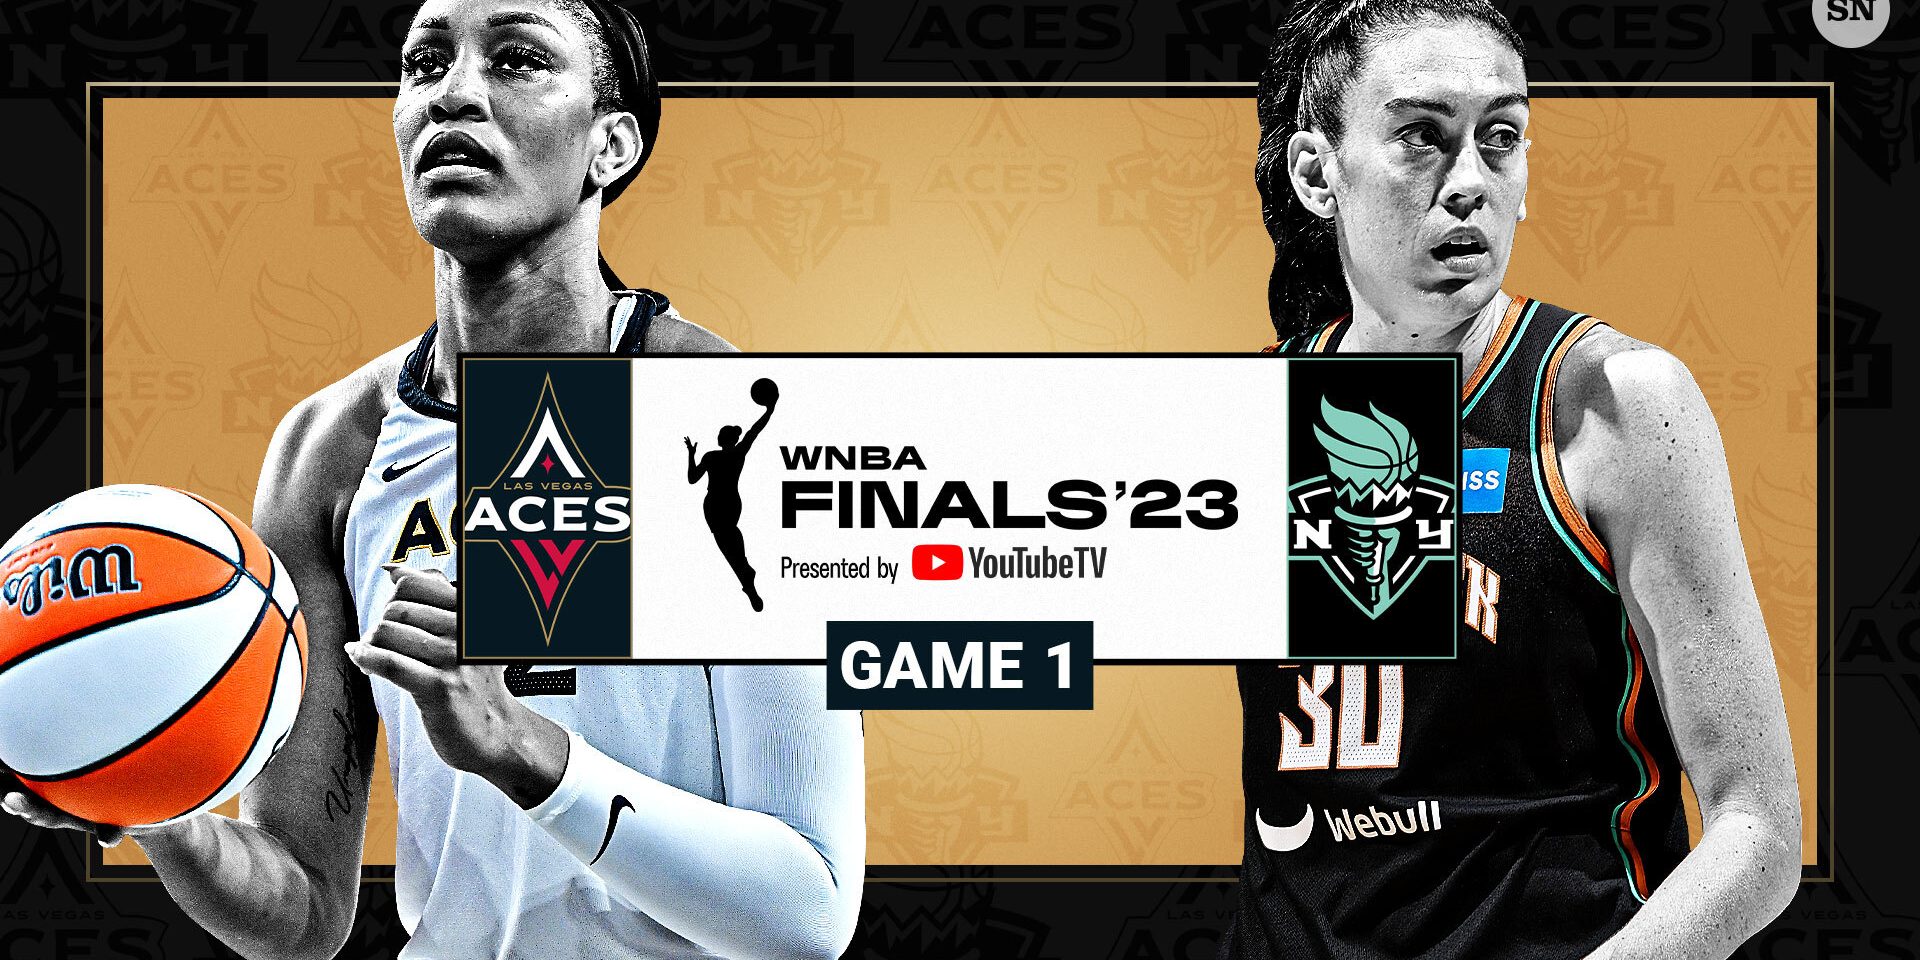 Liberty vs. Aces score, result: Career-highs lead Las Vegas to big win over New York in WNBA Finals Game 1